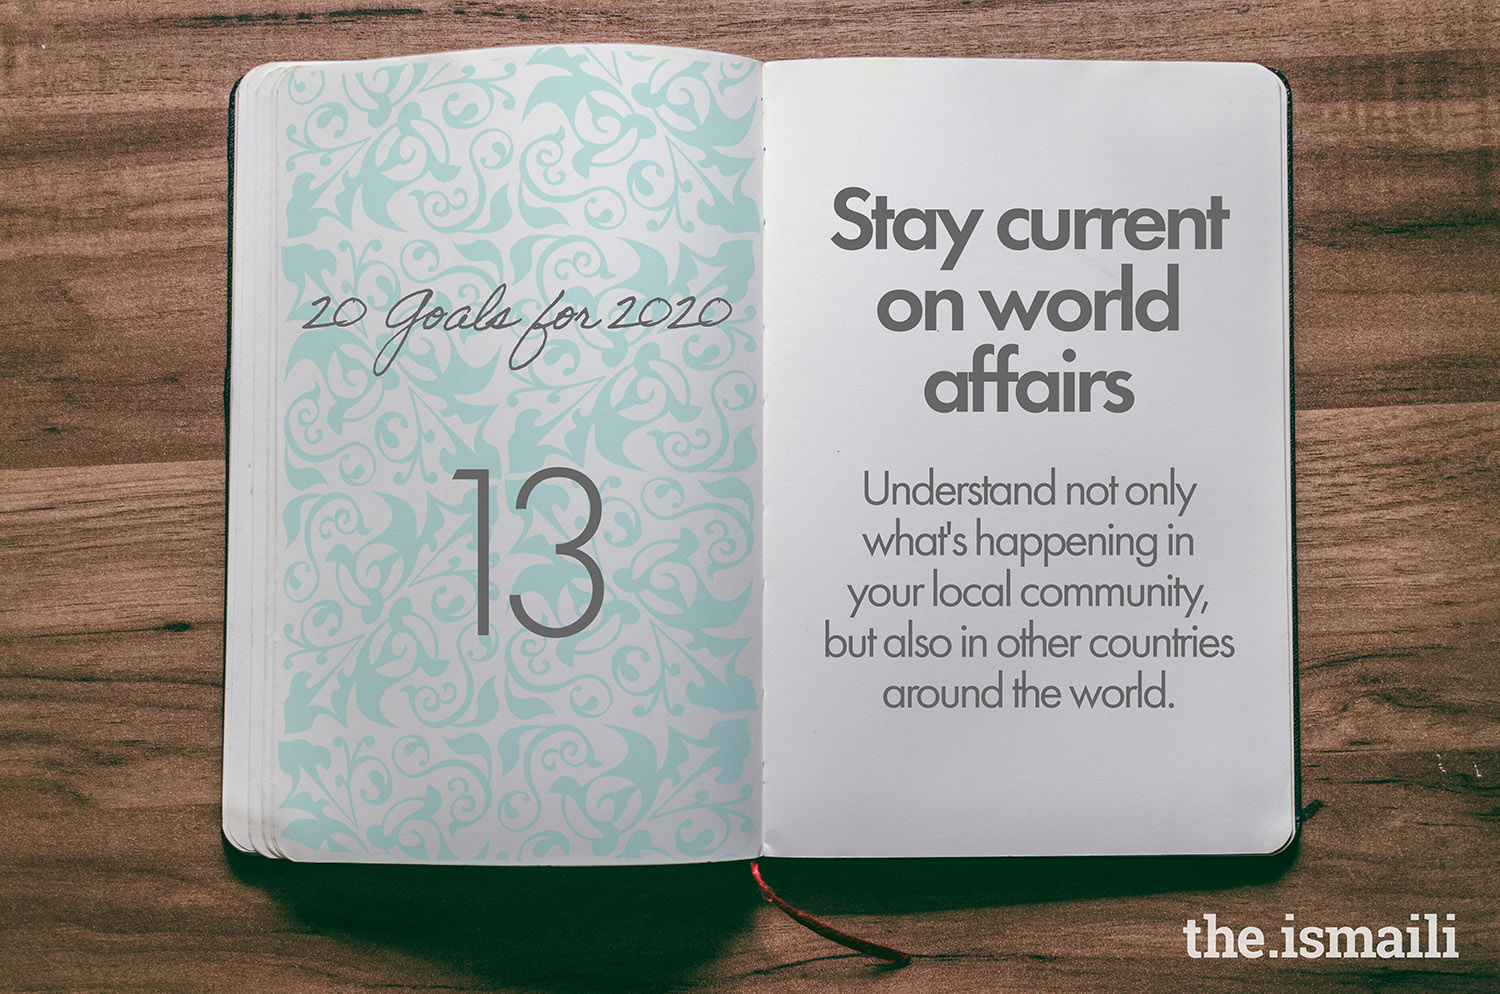 Goal 13: Stay current on world affairs